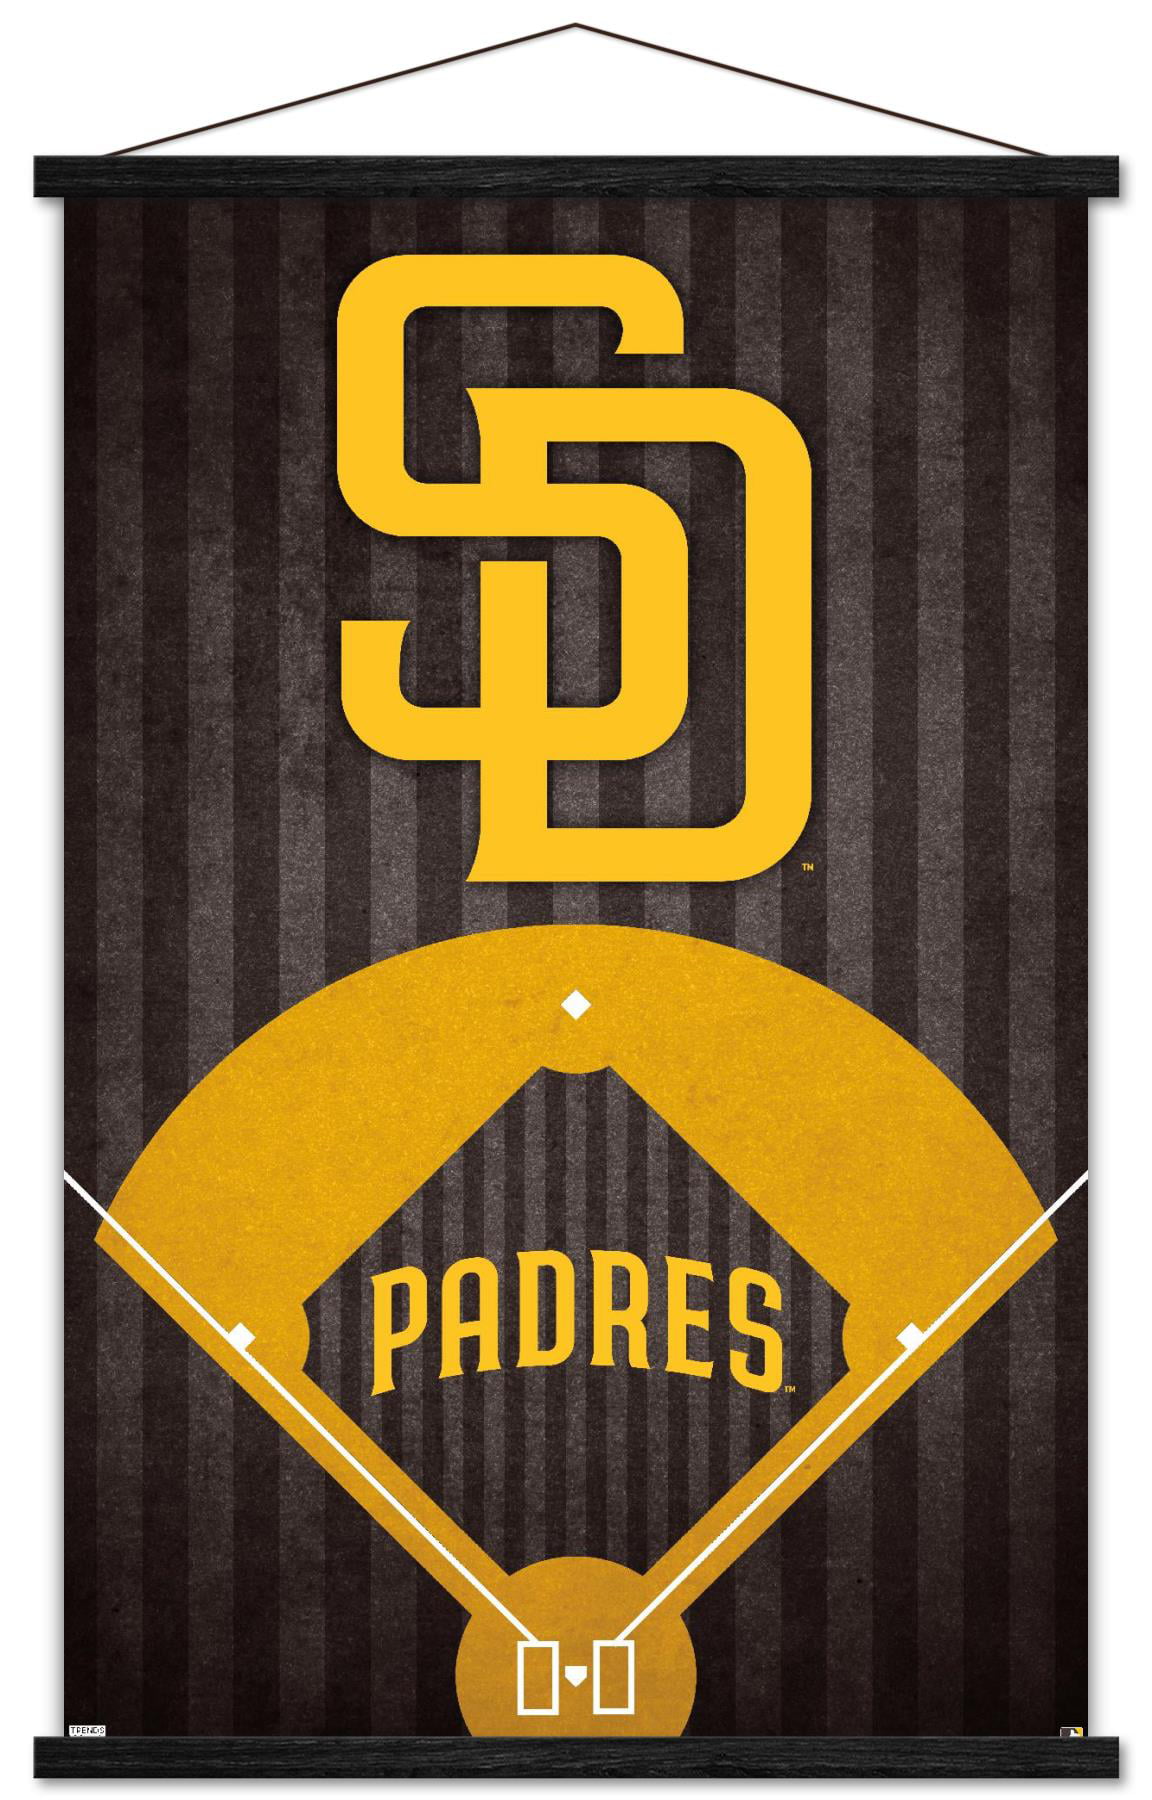 San Diego Padres Logo coloring page - Download, Print or Color Online for  Free